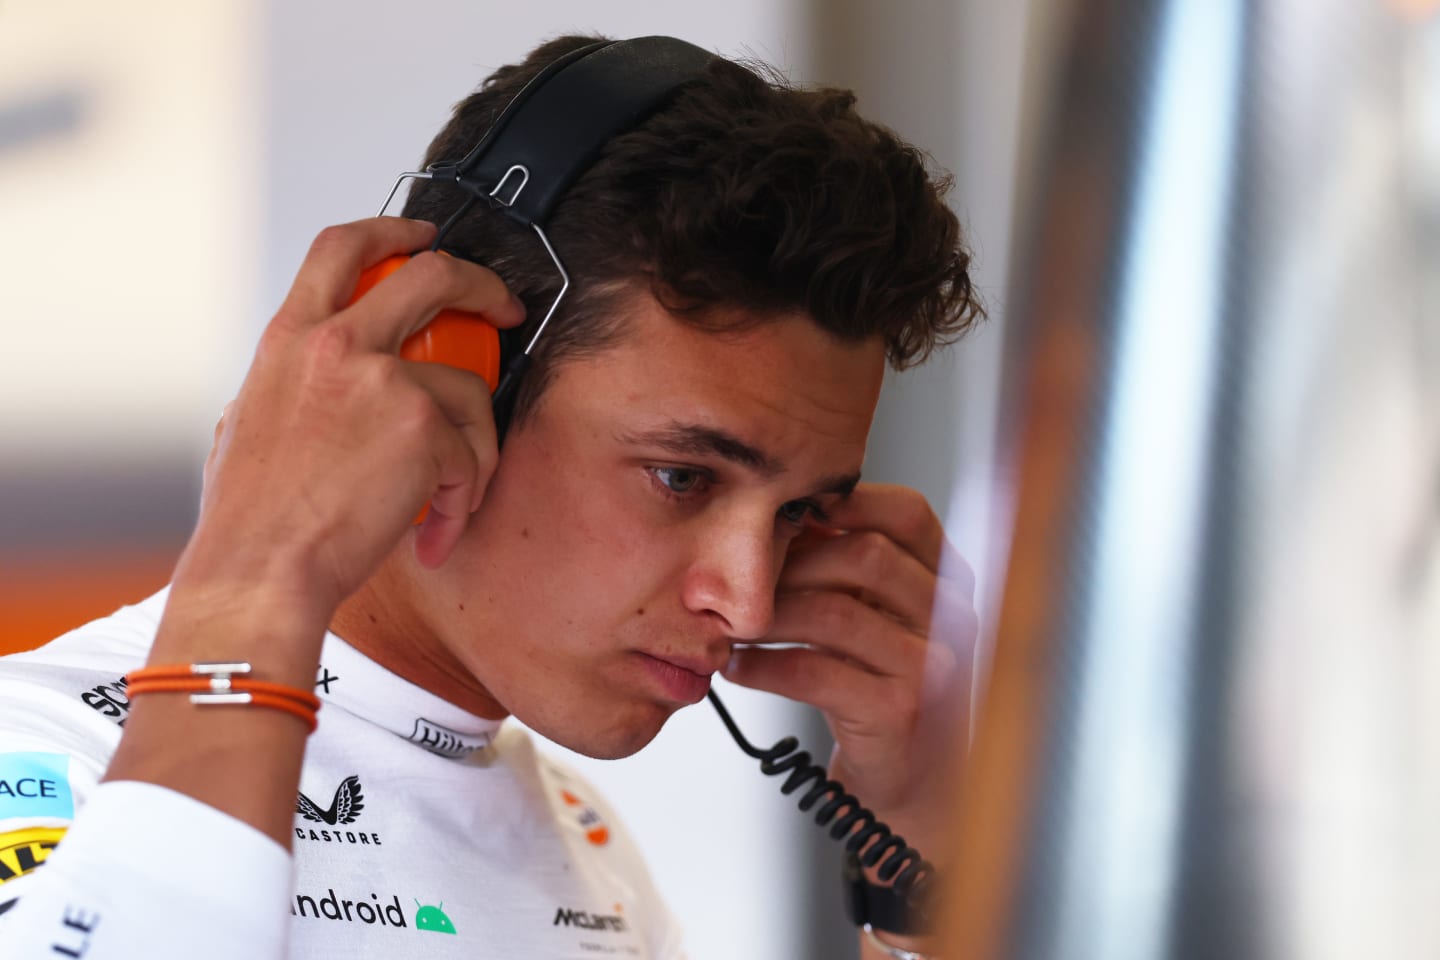 JEDDAH, SAUDI ARABIA - MARCH 25: Lando Norris of Great Britain and McLaren looks on in the garage during practice ahead of the F1 Grand Prix of Saudi Arabia at the Jeddah Corniche Circuit on March 25, 2022 in Jeddah, Saudi Arabia. (Photo by Lars Baron/Getty Images)